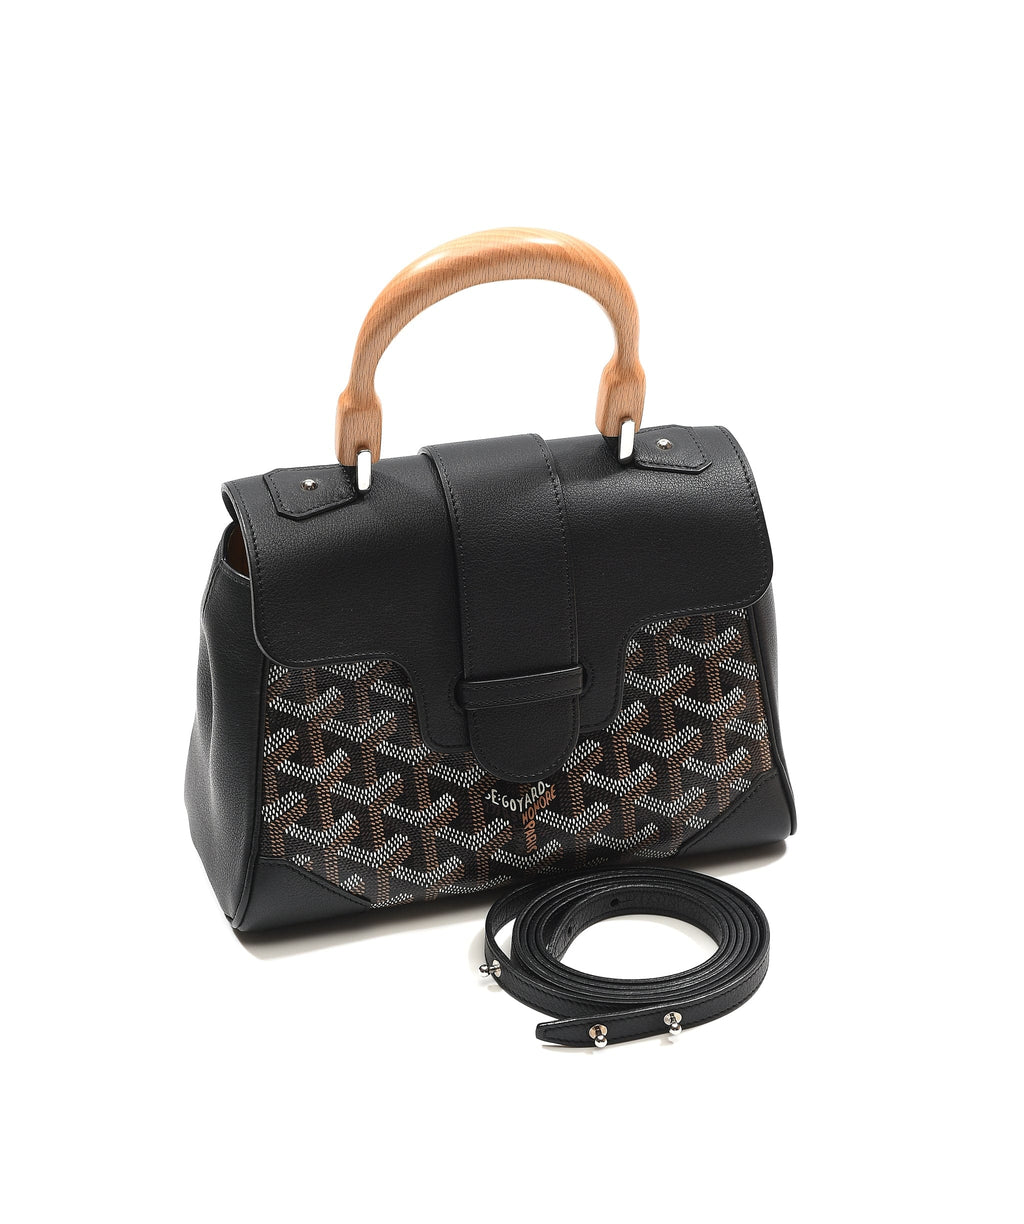 Quick Tips to Authenticate the Goyard Structured Mini Saigon - Academy by  FASHIONPHILE